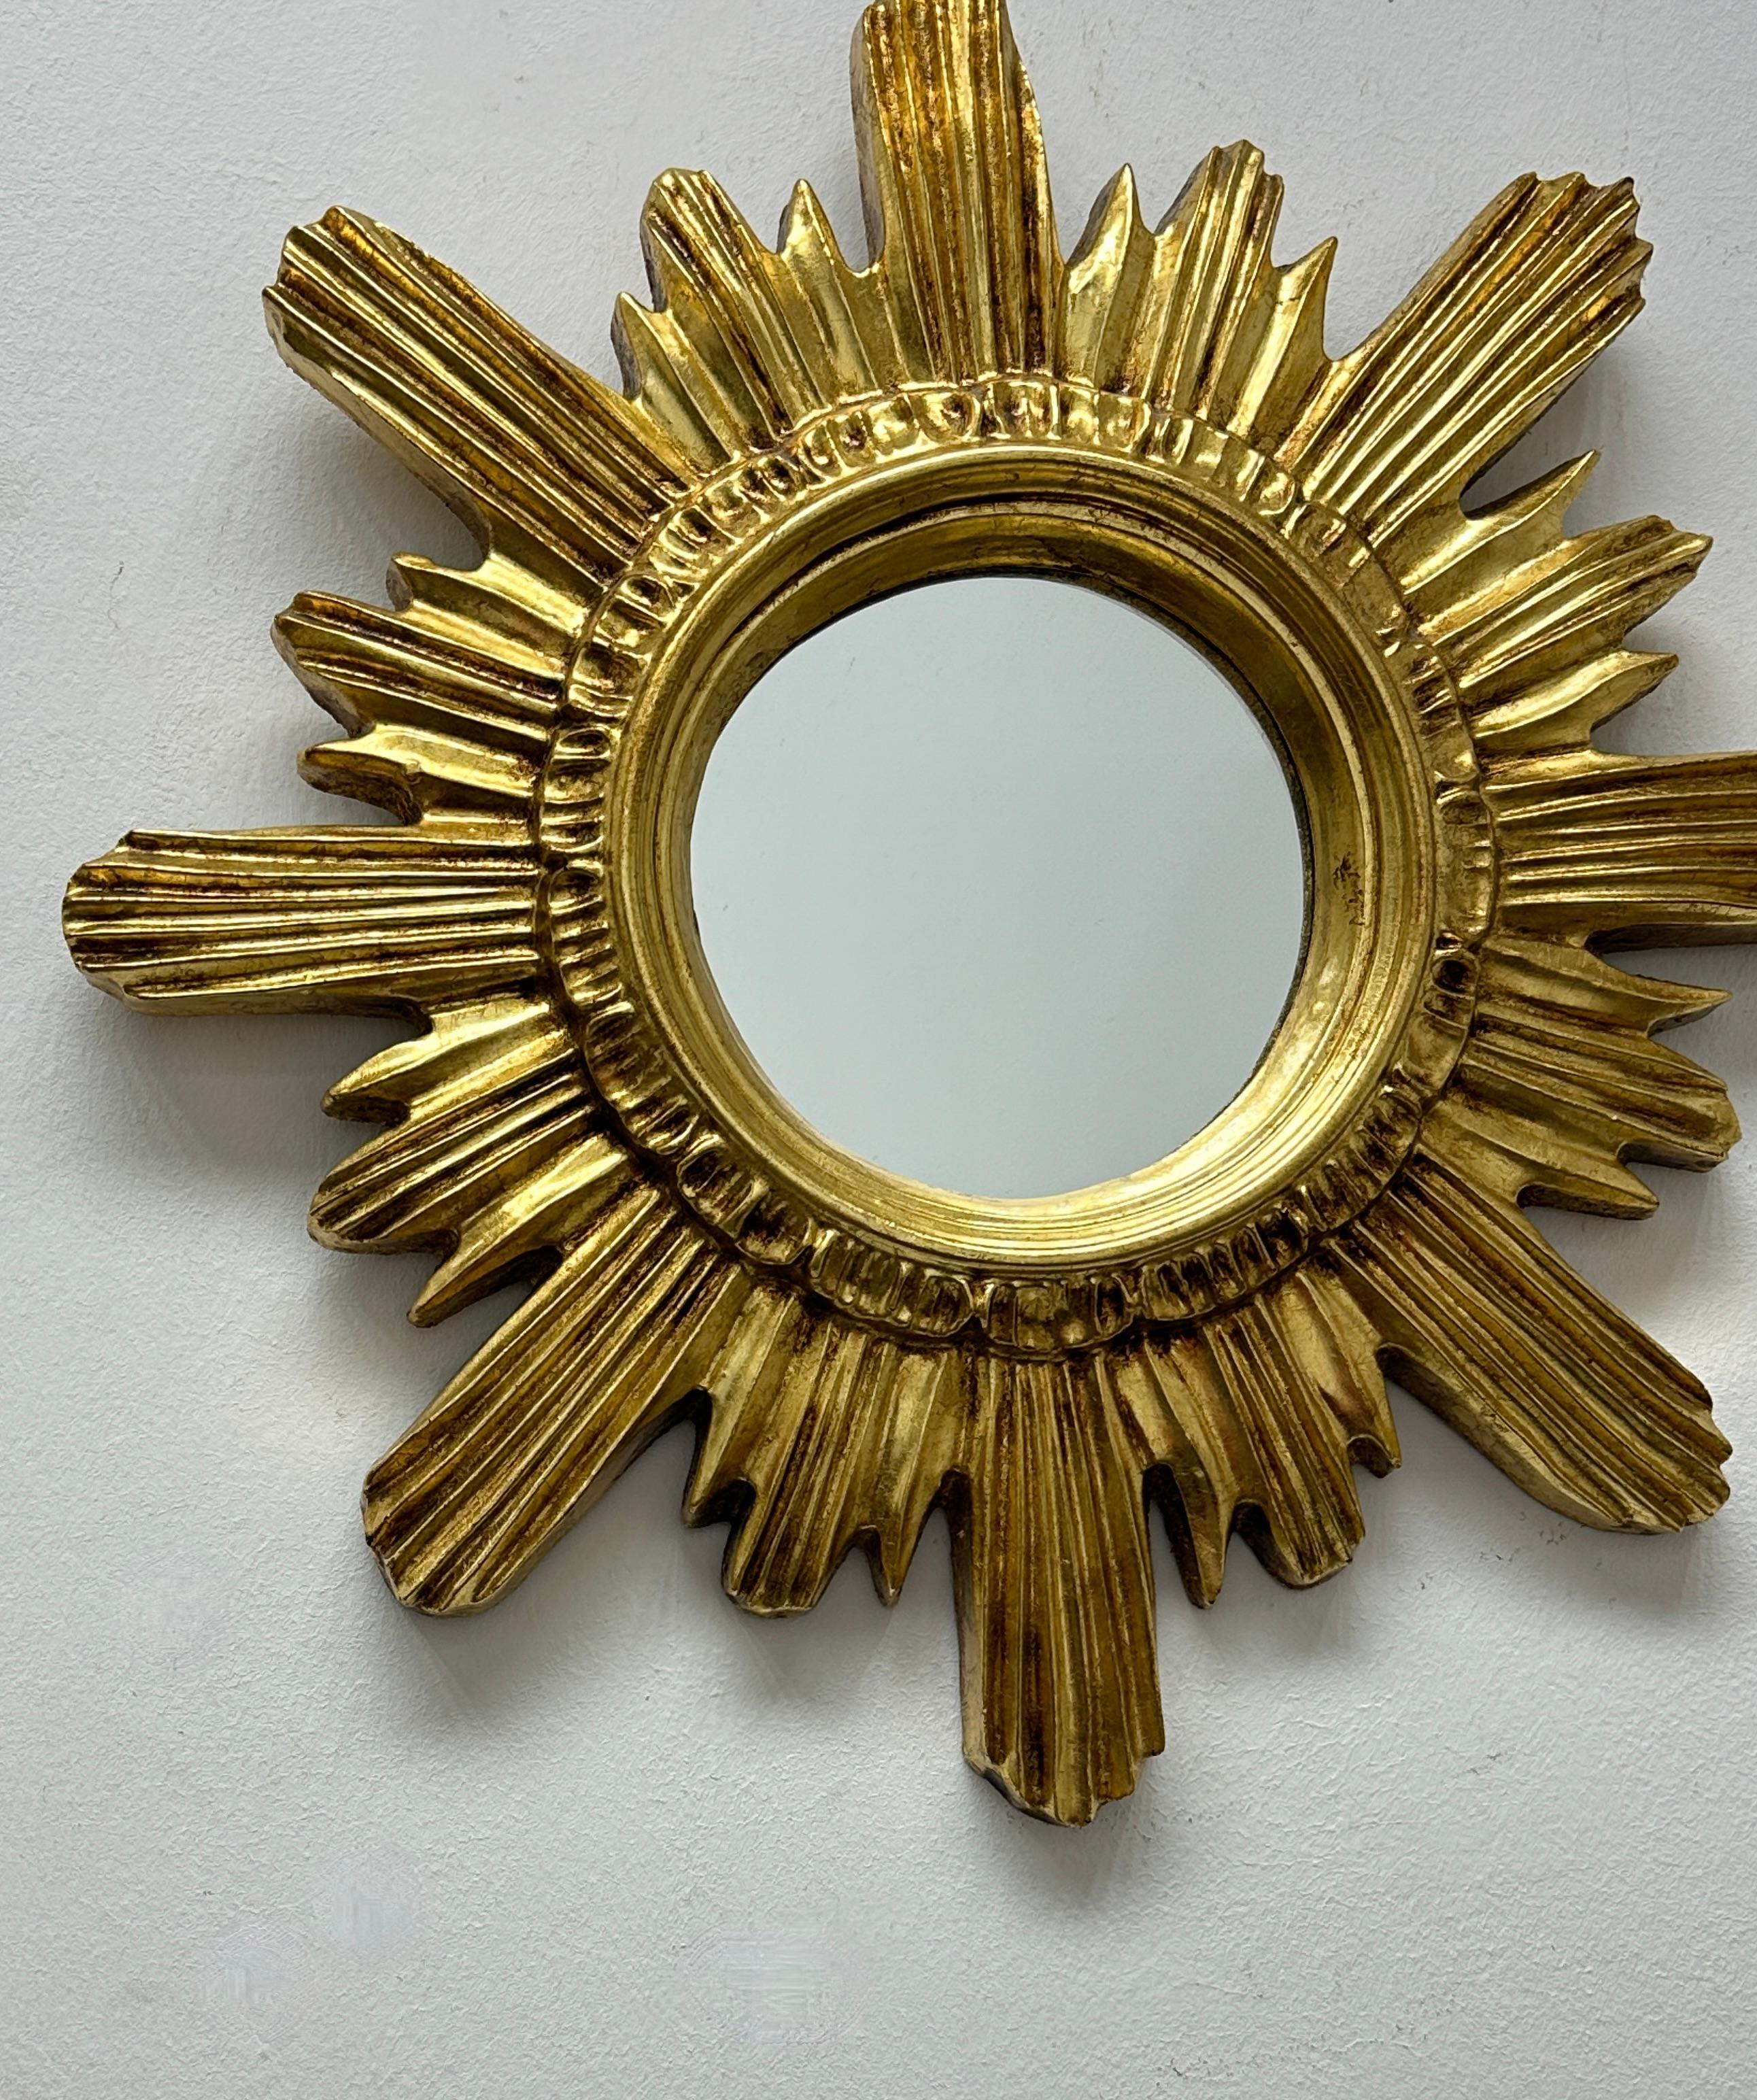 A gorgeous starburst mirror. Made of plastic or resin. No chips, no cracks, no repairs. It measures approximately 16.25